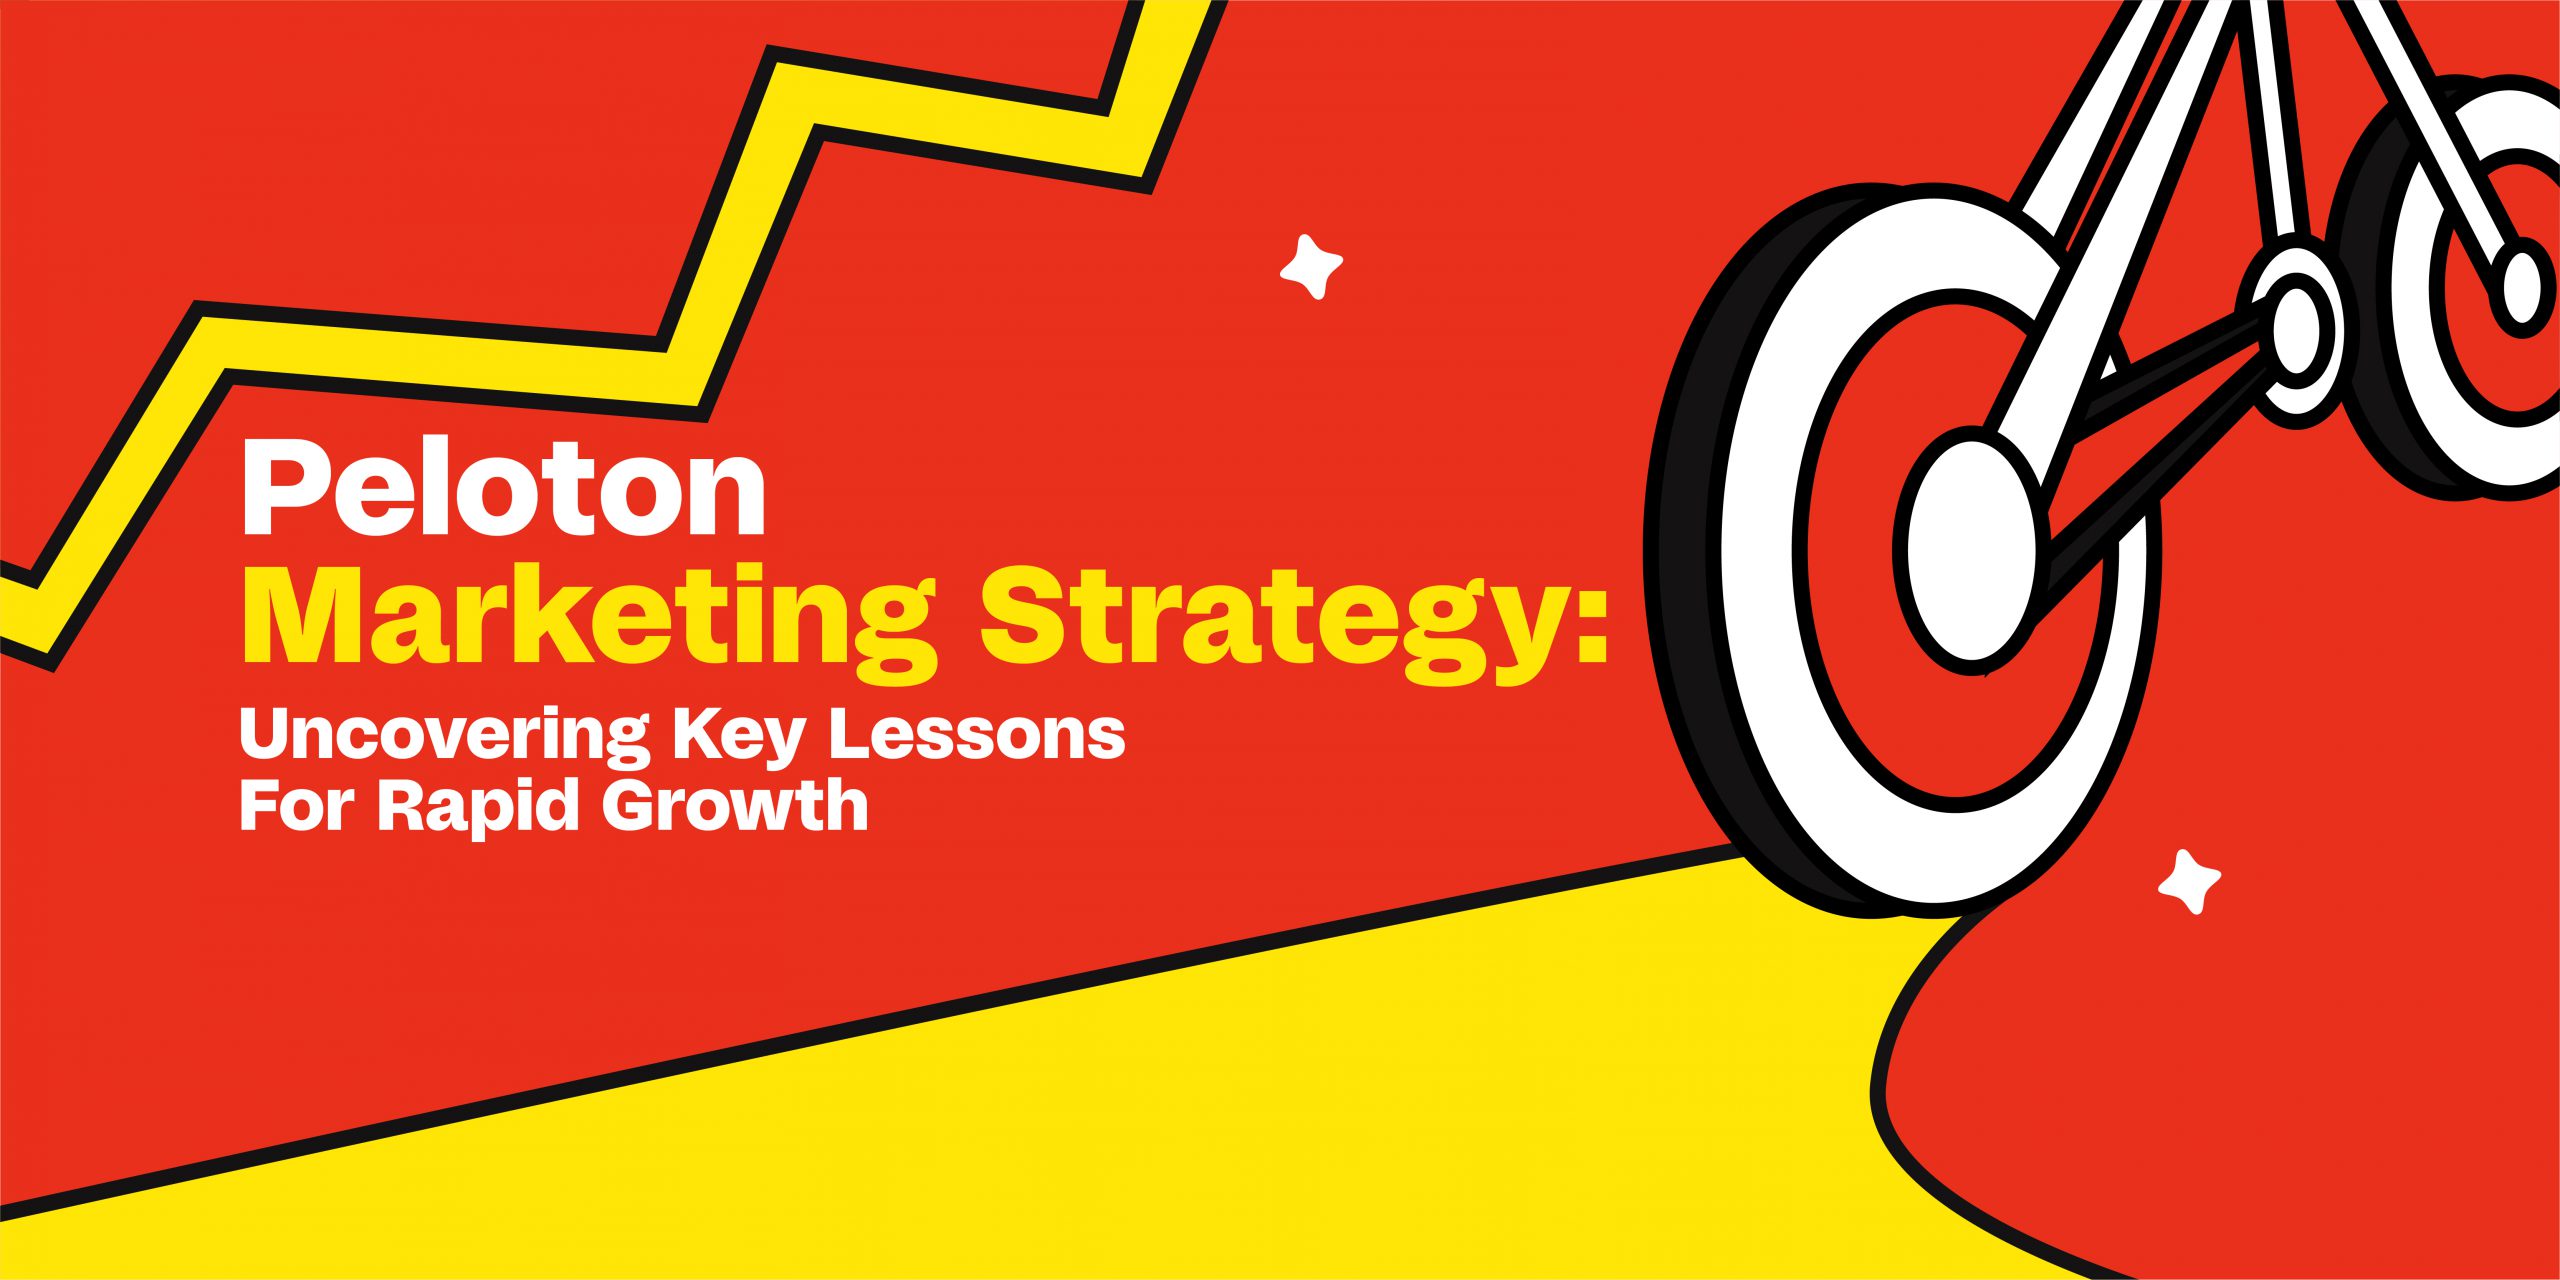 Thumbnail of Peloton Marketing Strategy: Uncovering Key Lessons For Rapid Growth - NoGood™: Growth Marketing Agency